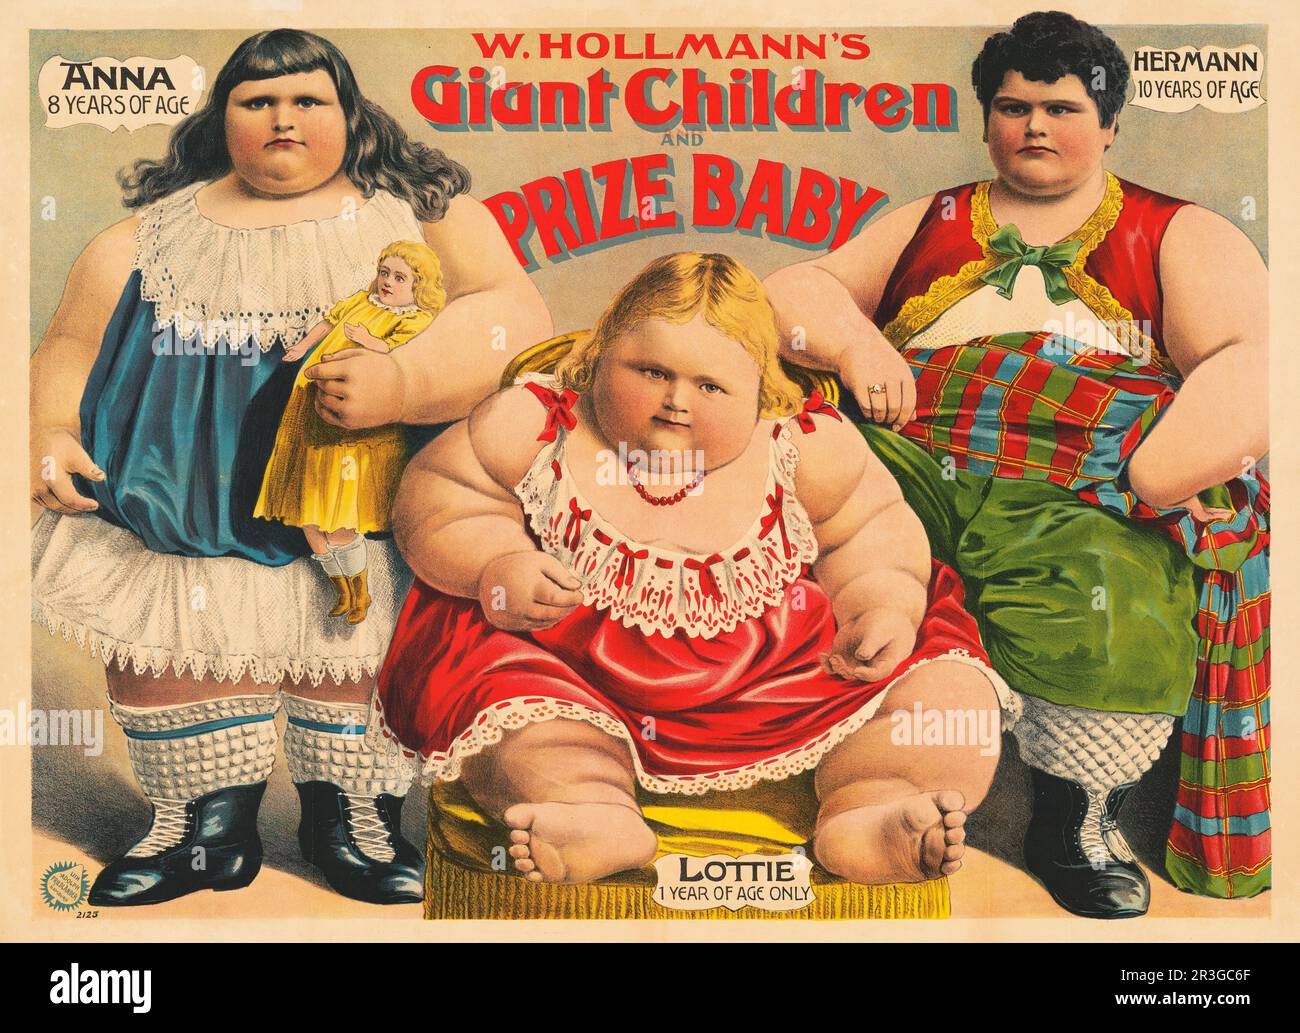 Vintage circus poster showing W. Hollmann's giant children and prize baby. Stock Photo